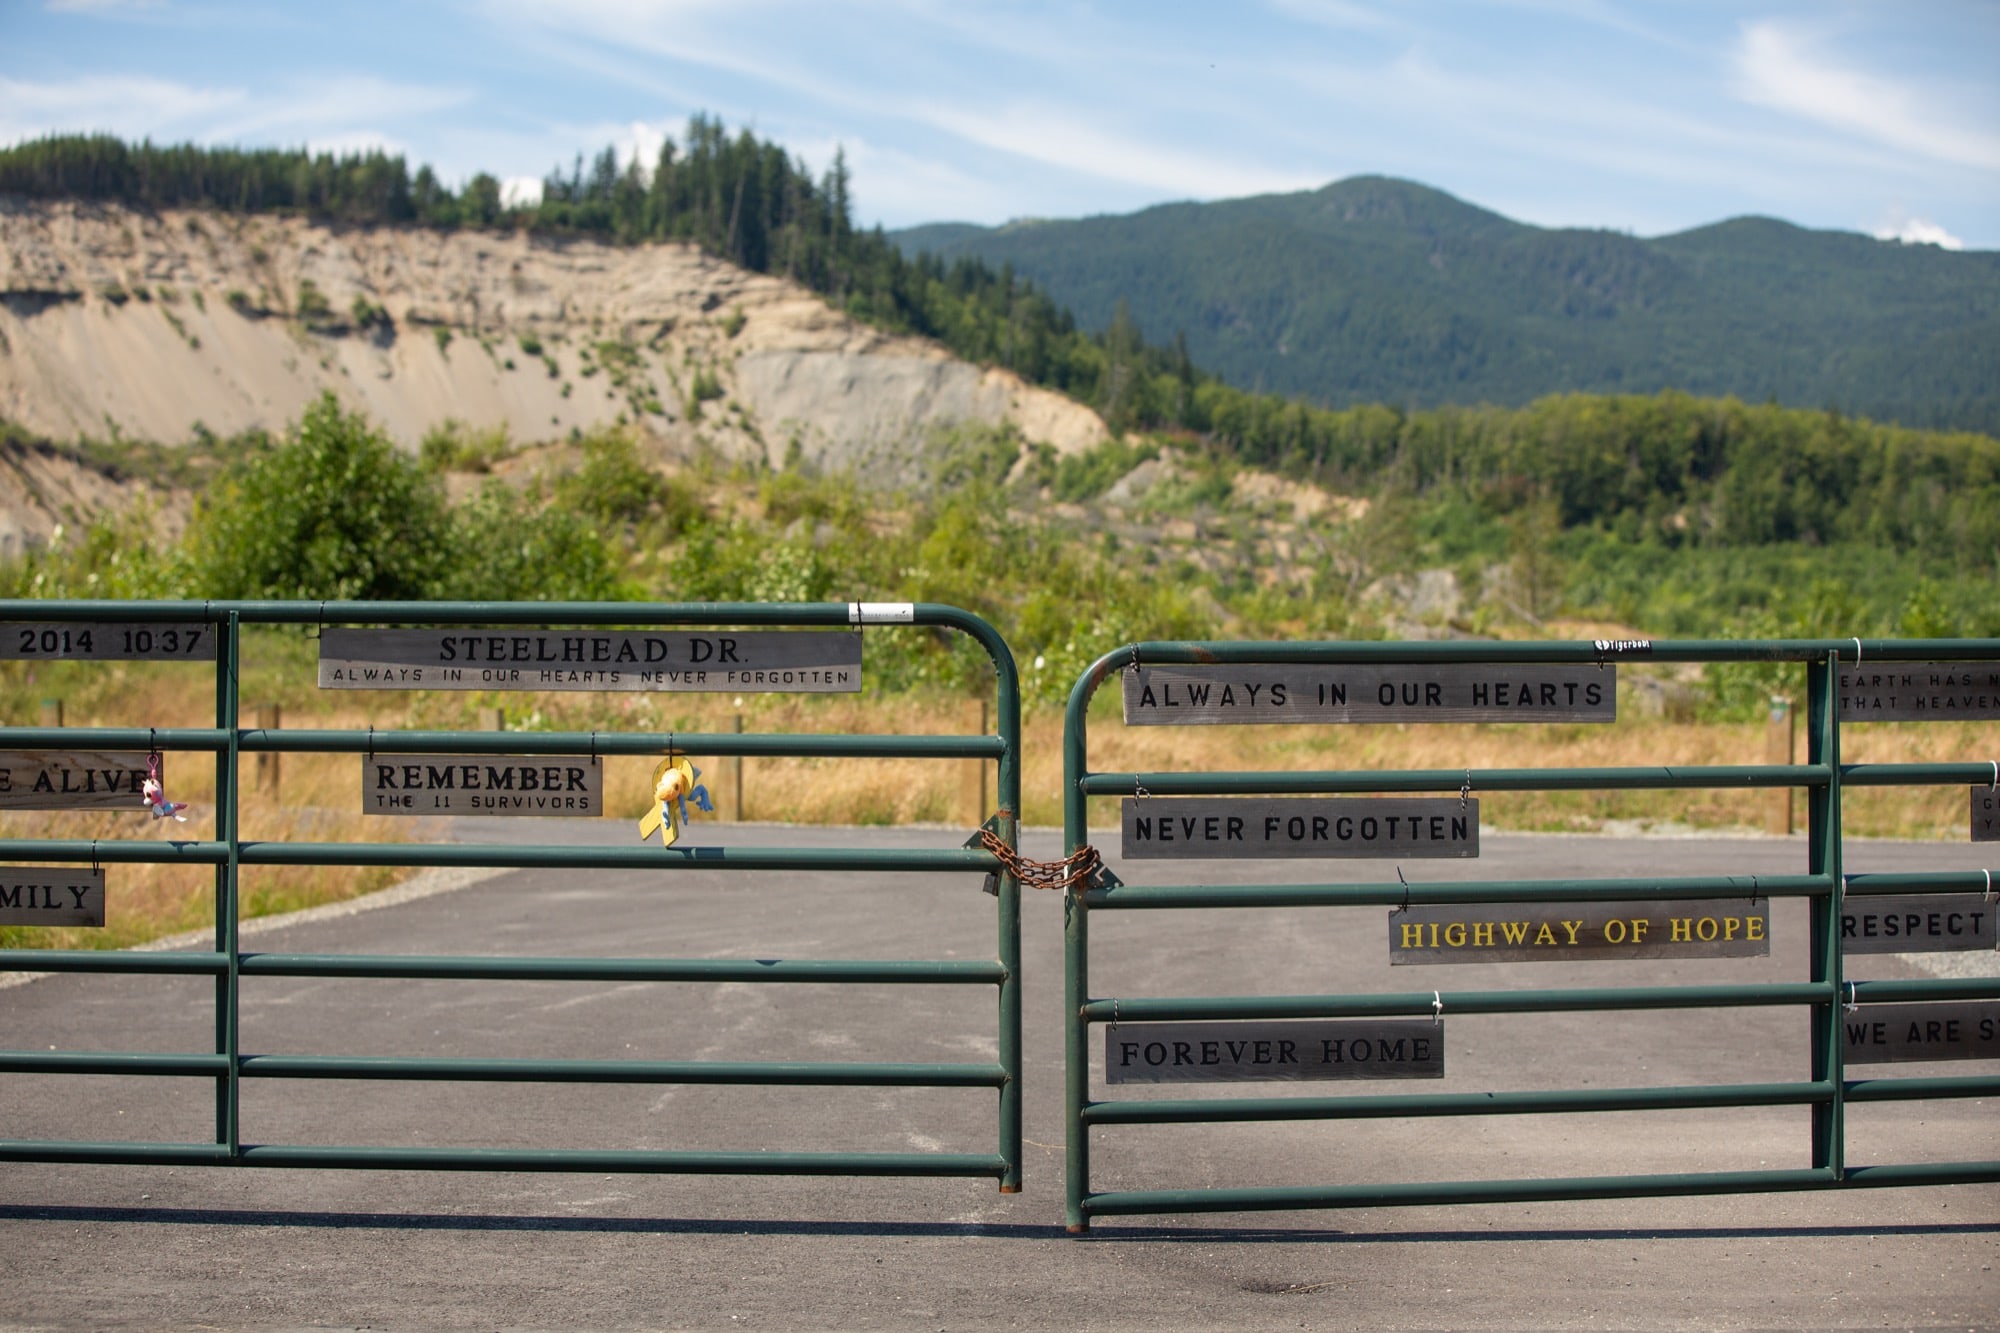 Messages of hope and remembrance adorn a fence on Steelhead Road in Oso, Washington, where 43 people died in a 2014 landslide – the largest in U.S. history. The temporary memorial also includes one tree for each person killed that day. In the background, the scar left by the slide is a reminder of the fickle power of nature. (Allie Barton/News21)